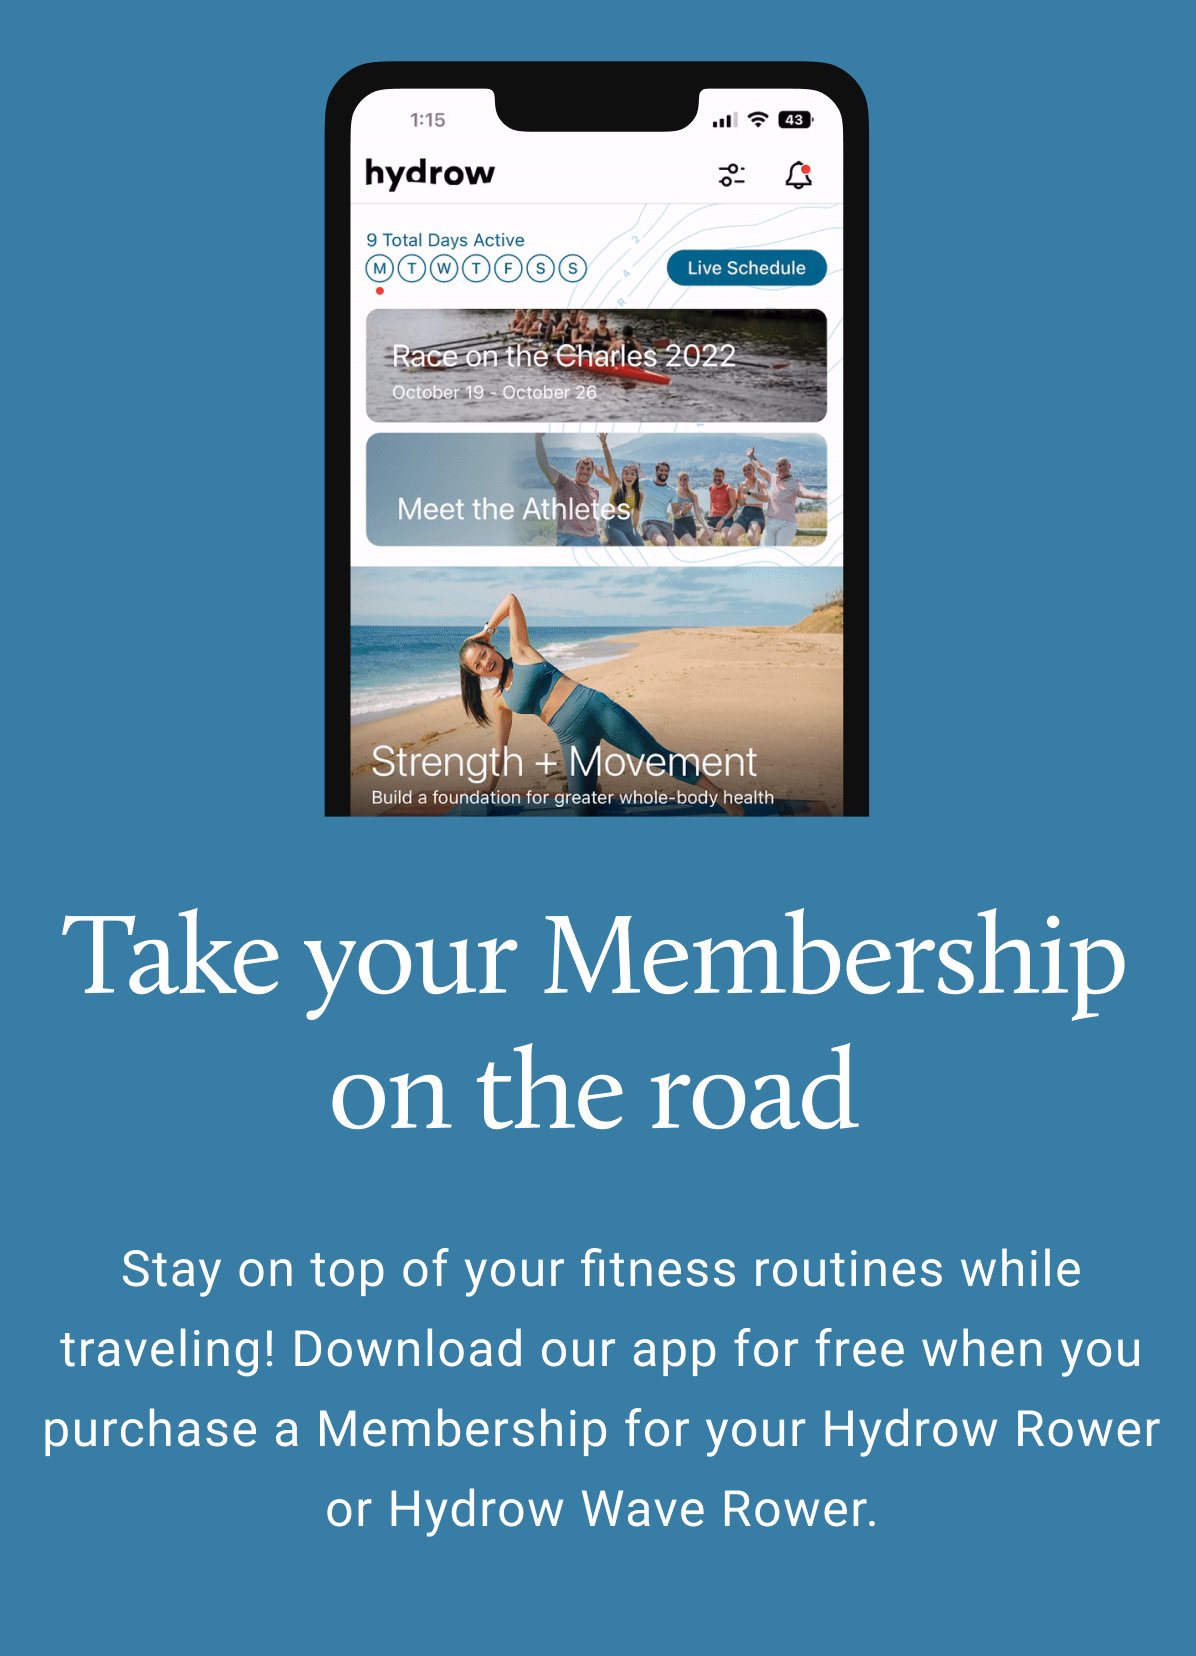 Hydrow Take your Membership on the road. Stay on top of your fitness routines while traveling! Download our app for free when you purchase a Membership for your Hydrow Rower or Hydrow Wave Rower.